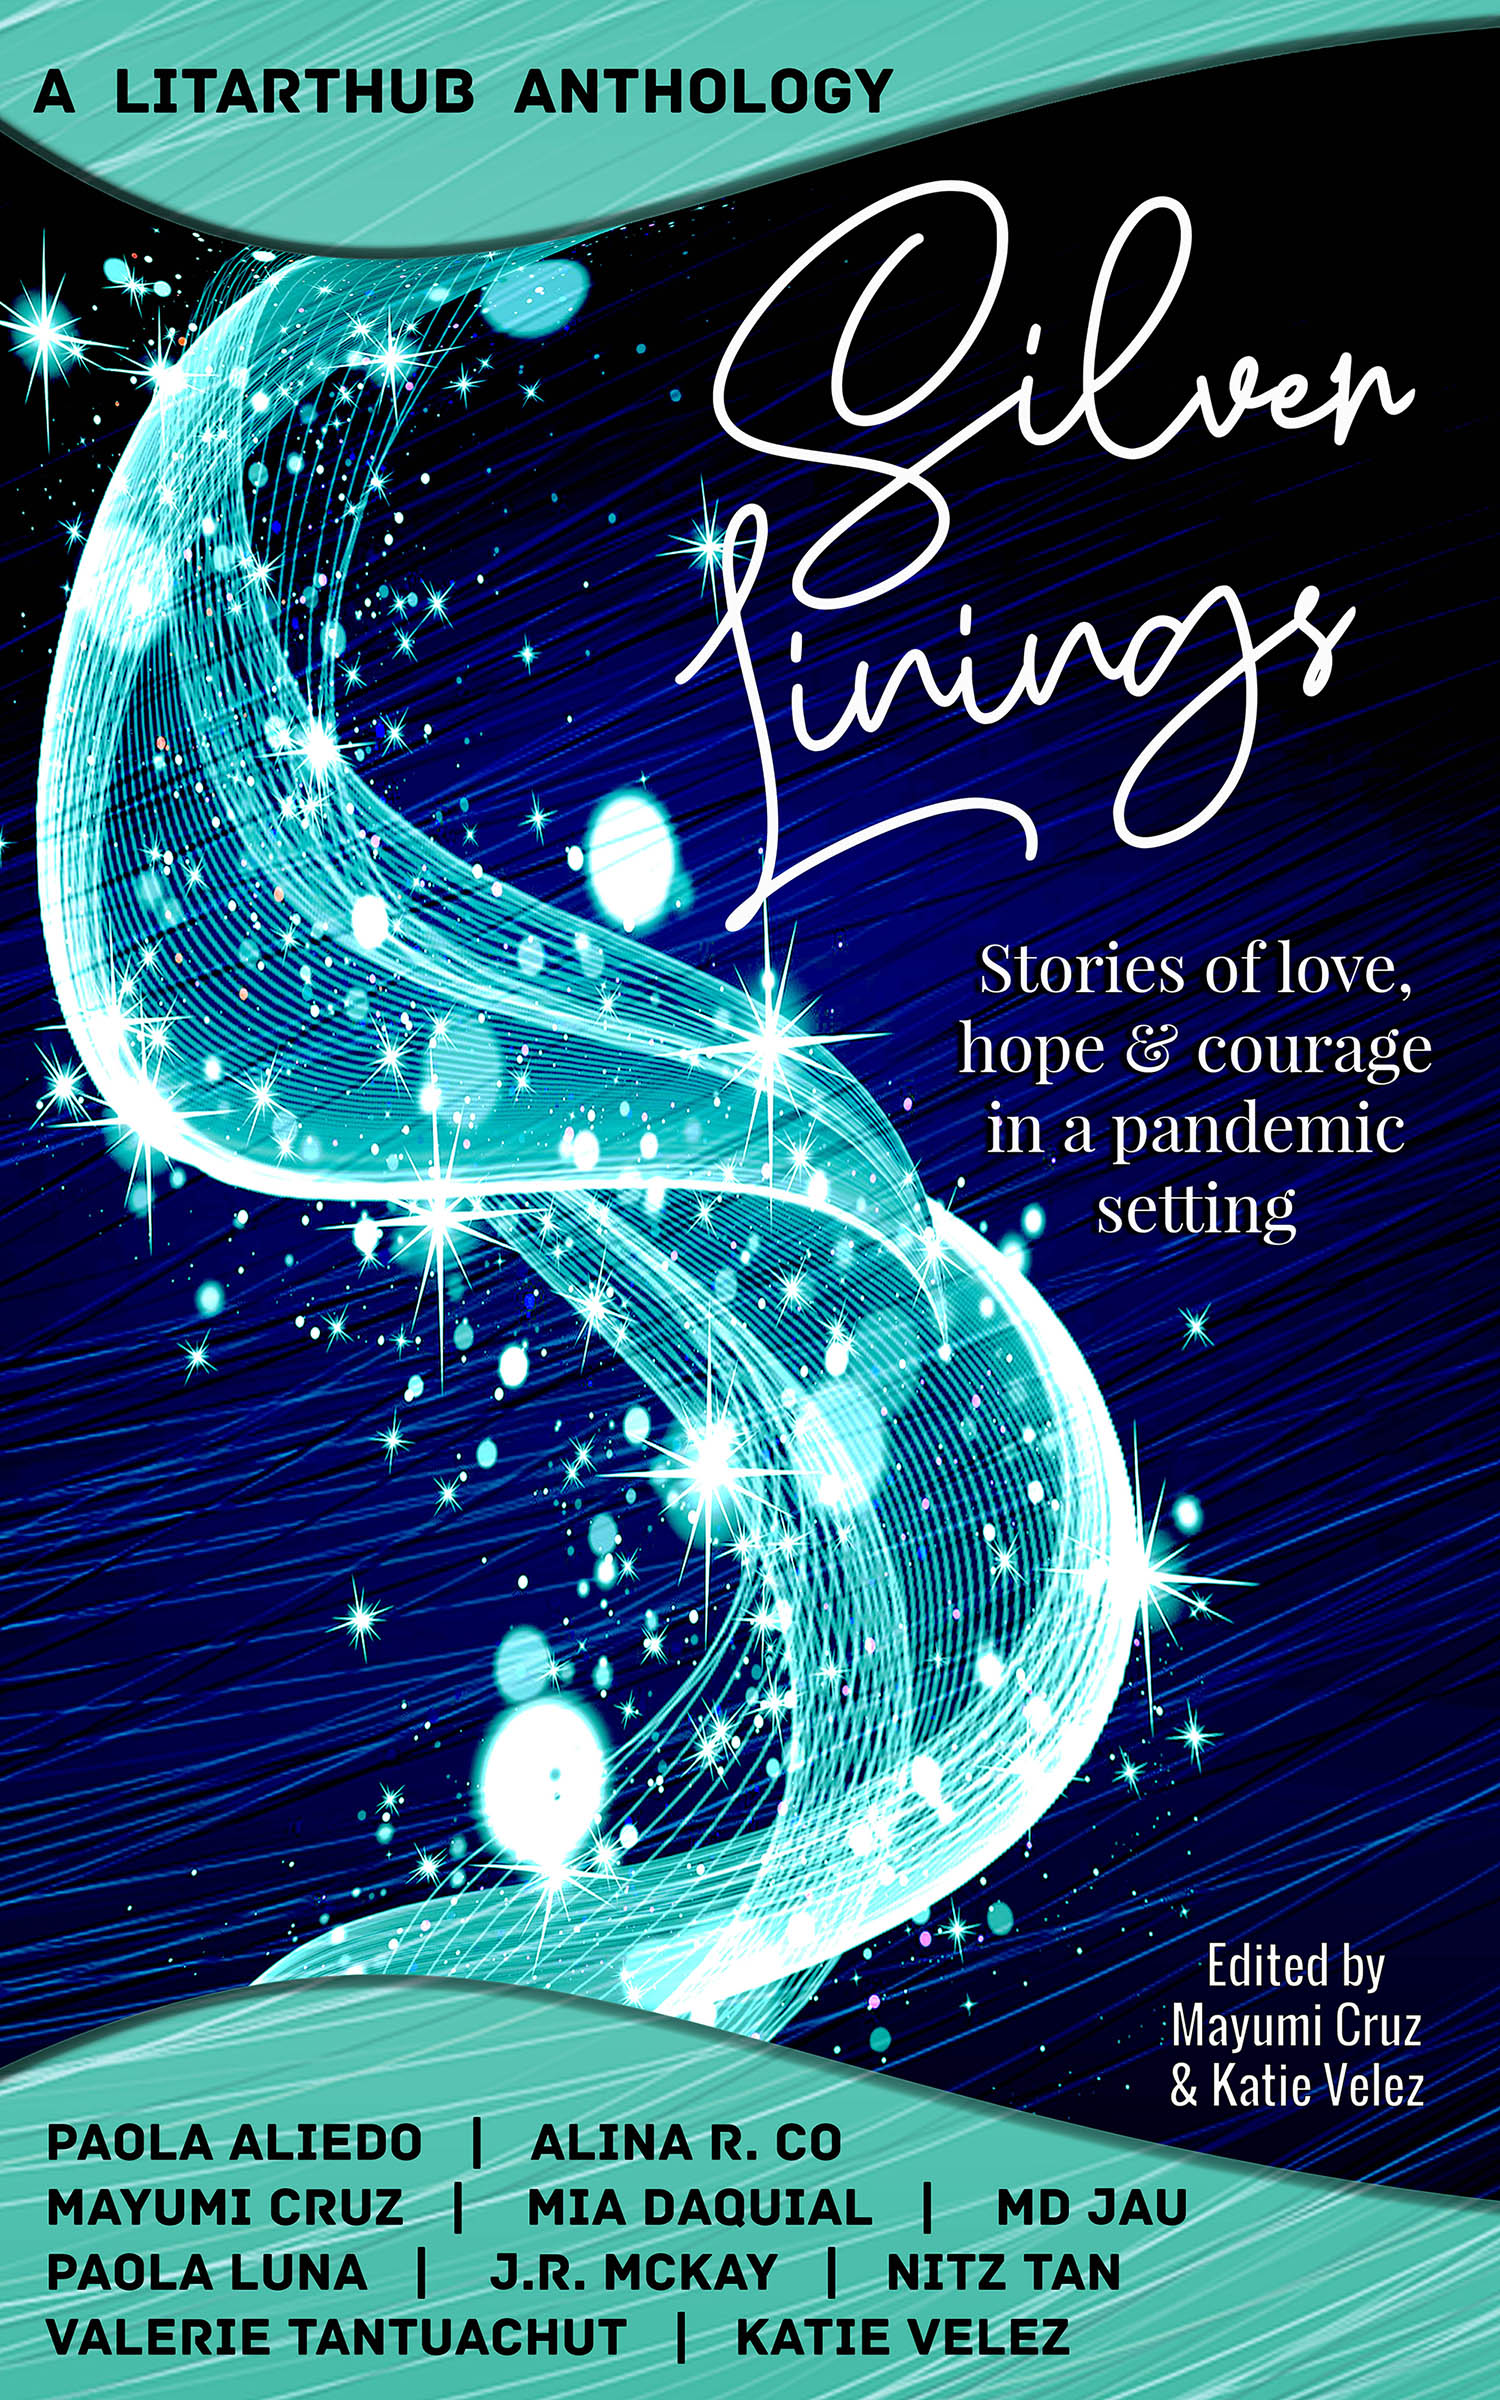 Silver Linings LitArtHub's First Anthology